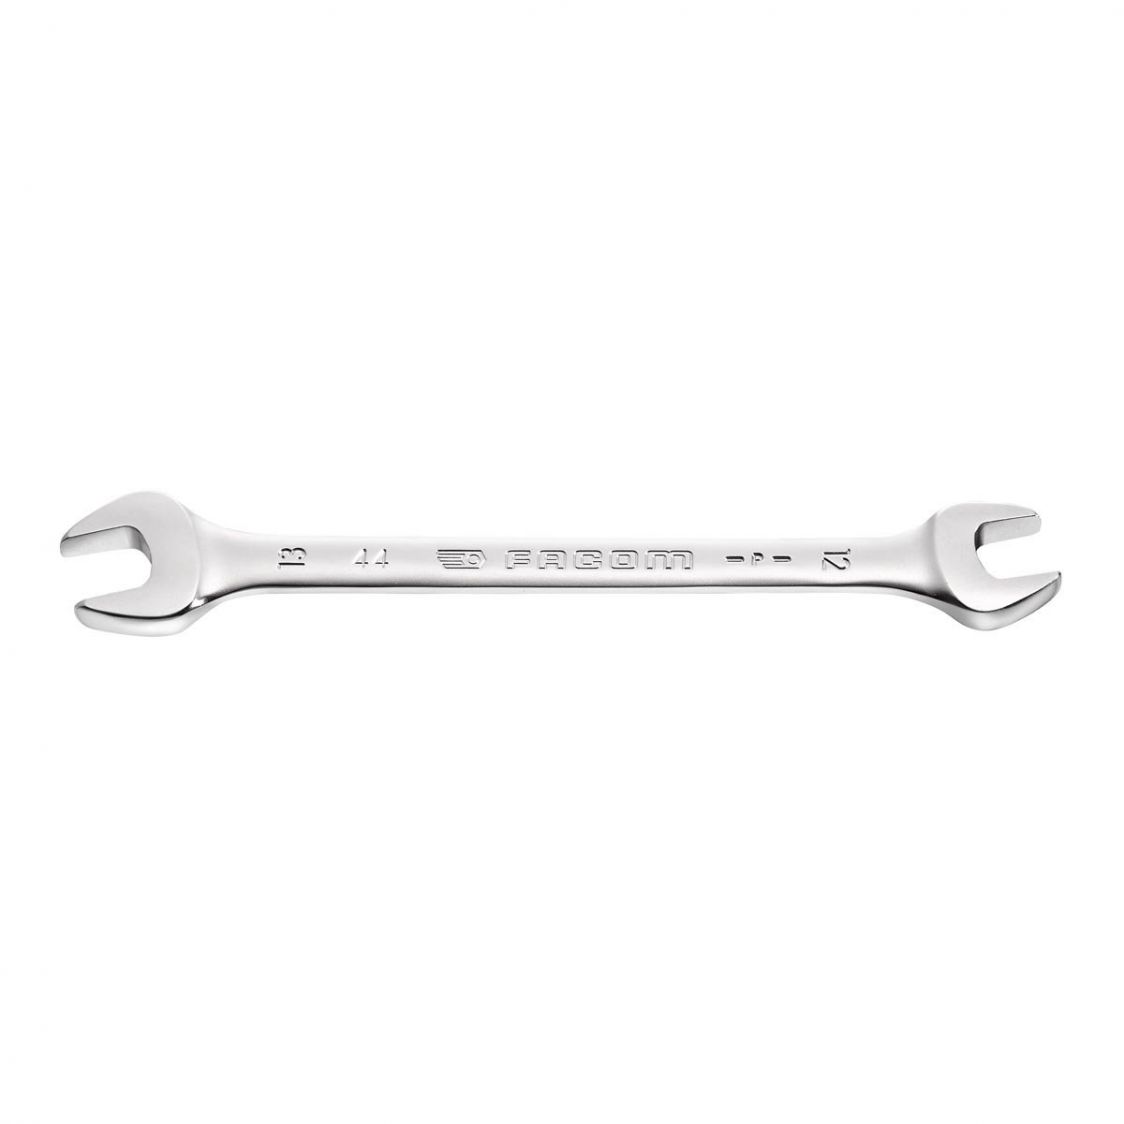 FACOM 44.22X24 - 22x24mm Metric Open Jaw Spanner